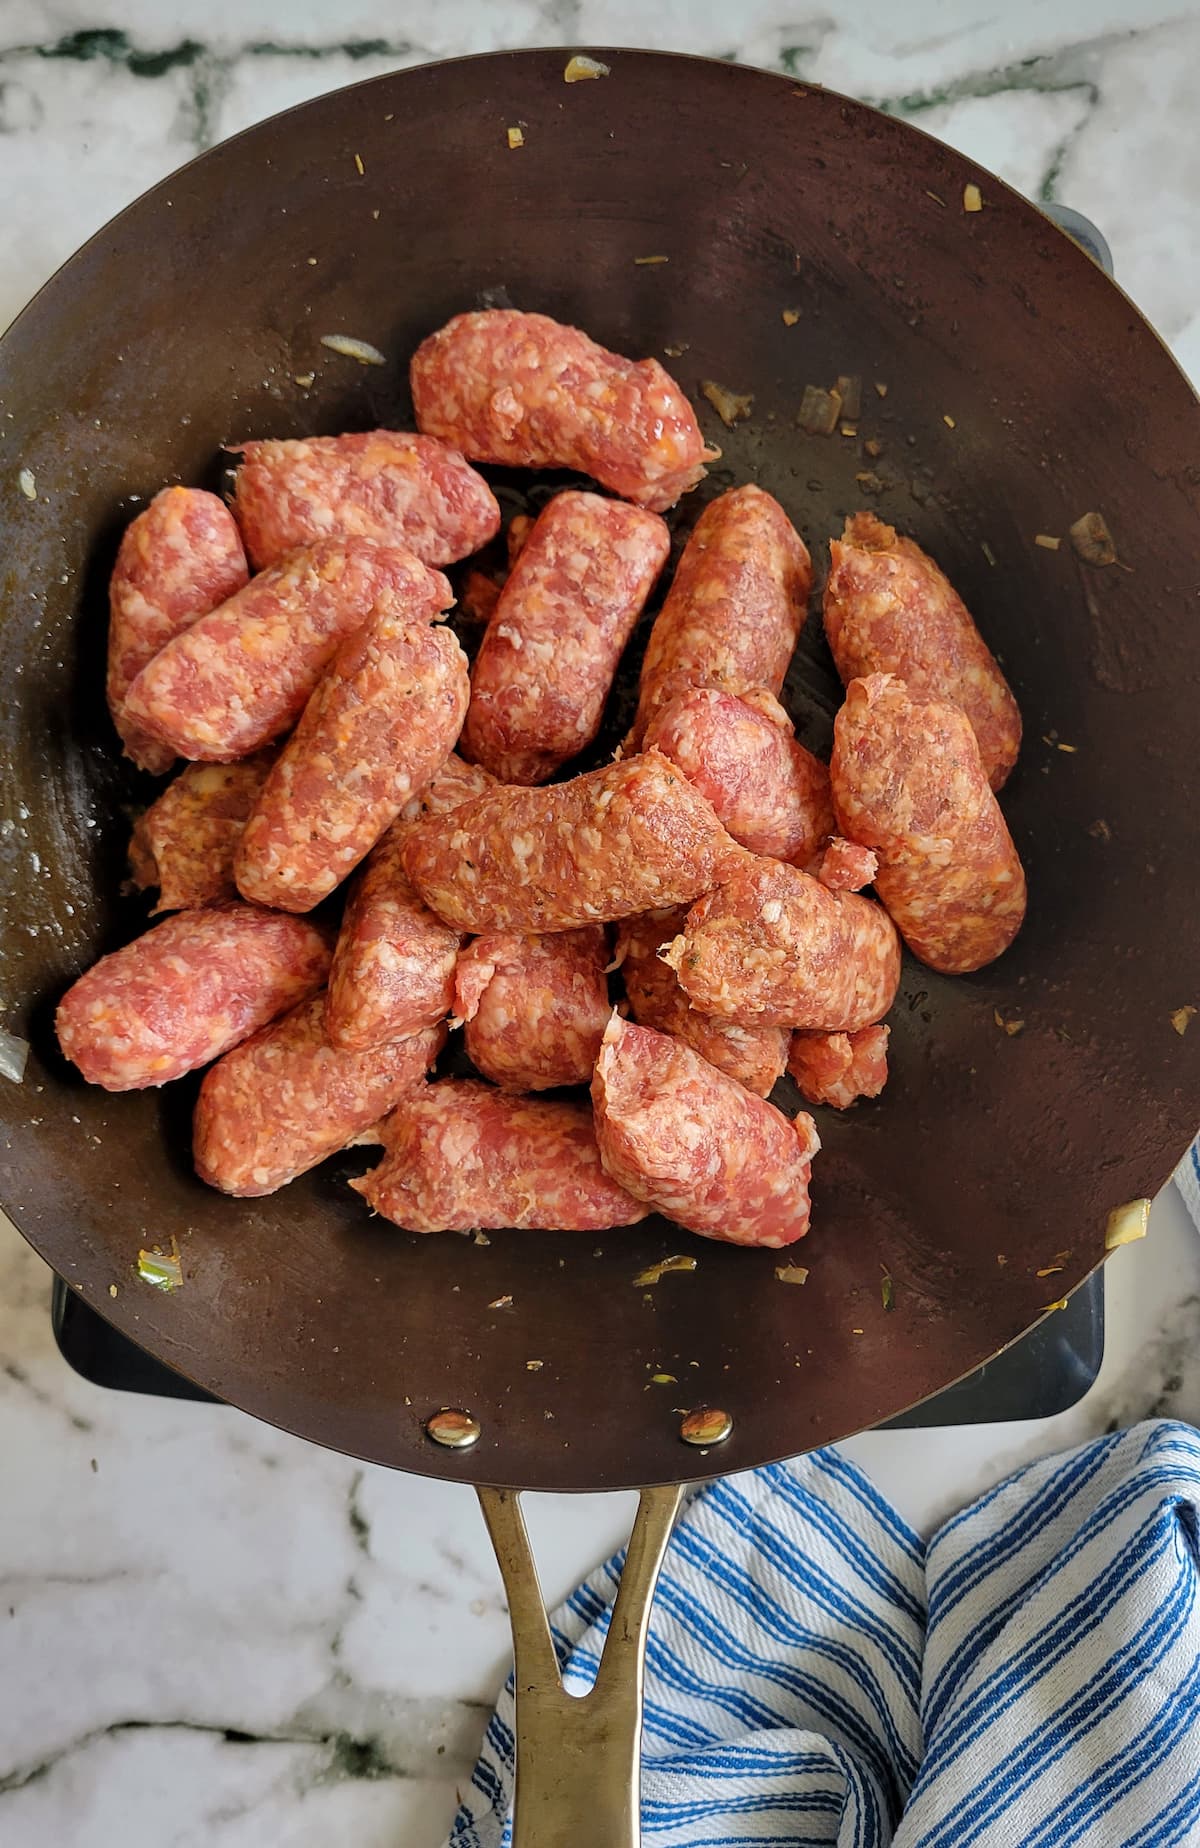 halved italian sausages out of their casing in a skillet